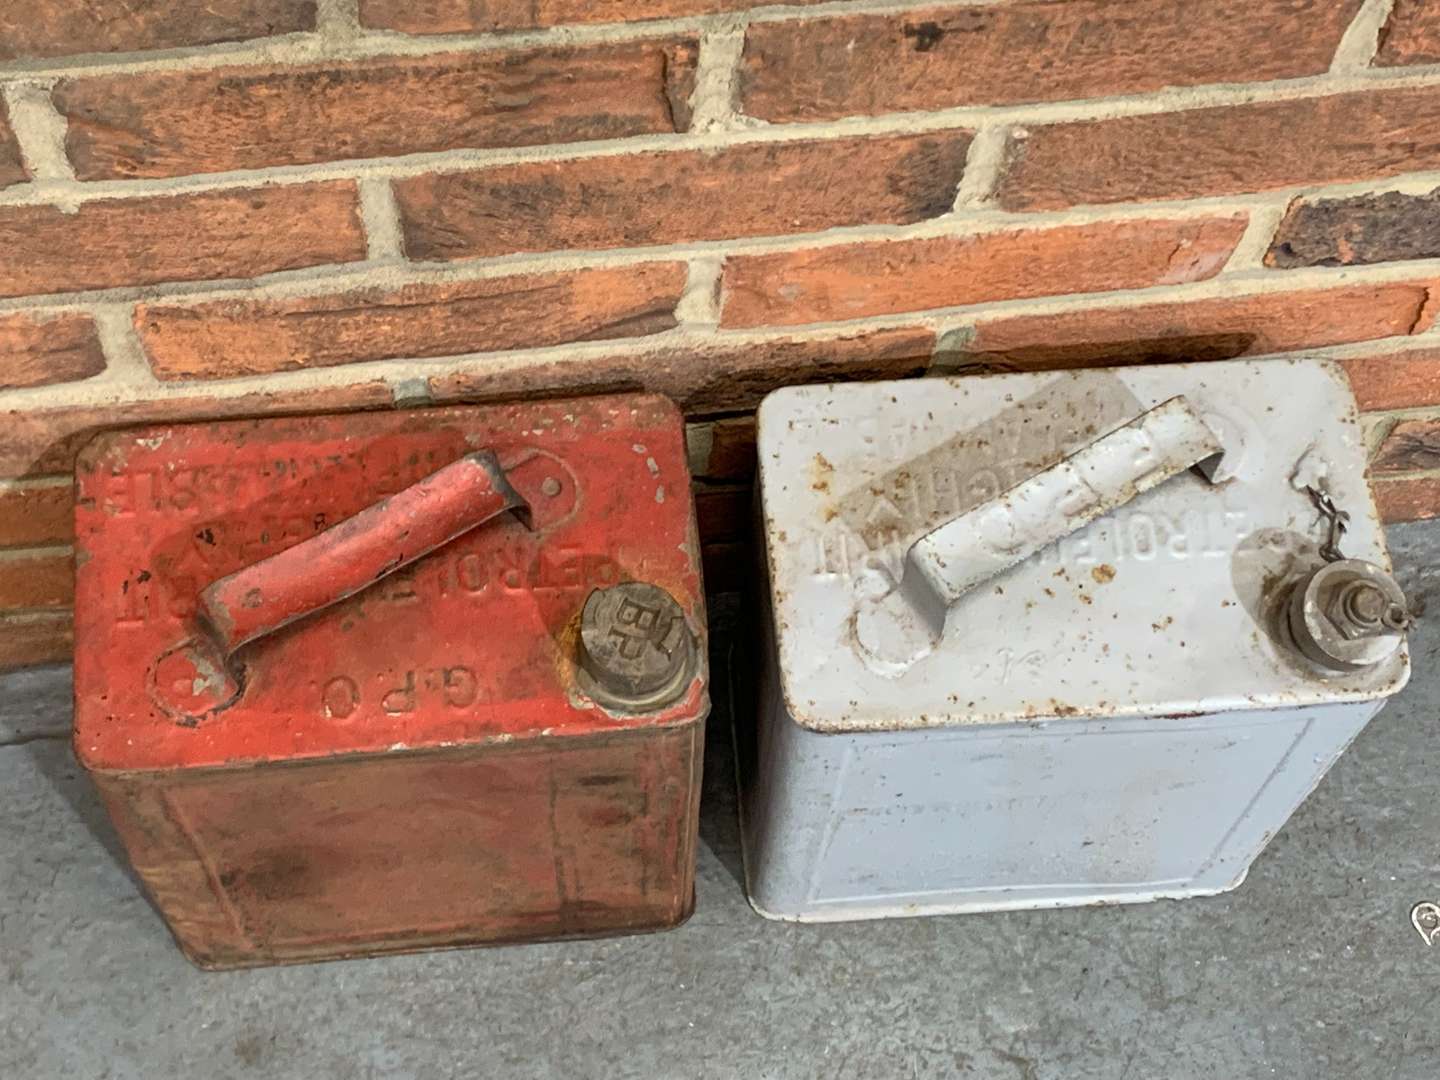 <p>Two, Two Gallon Fuel Cans</p>